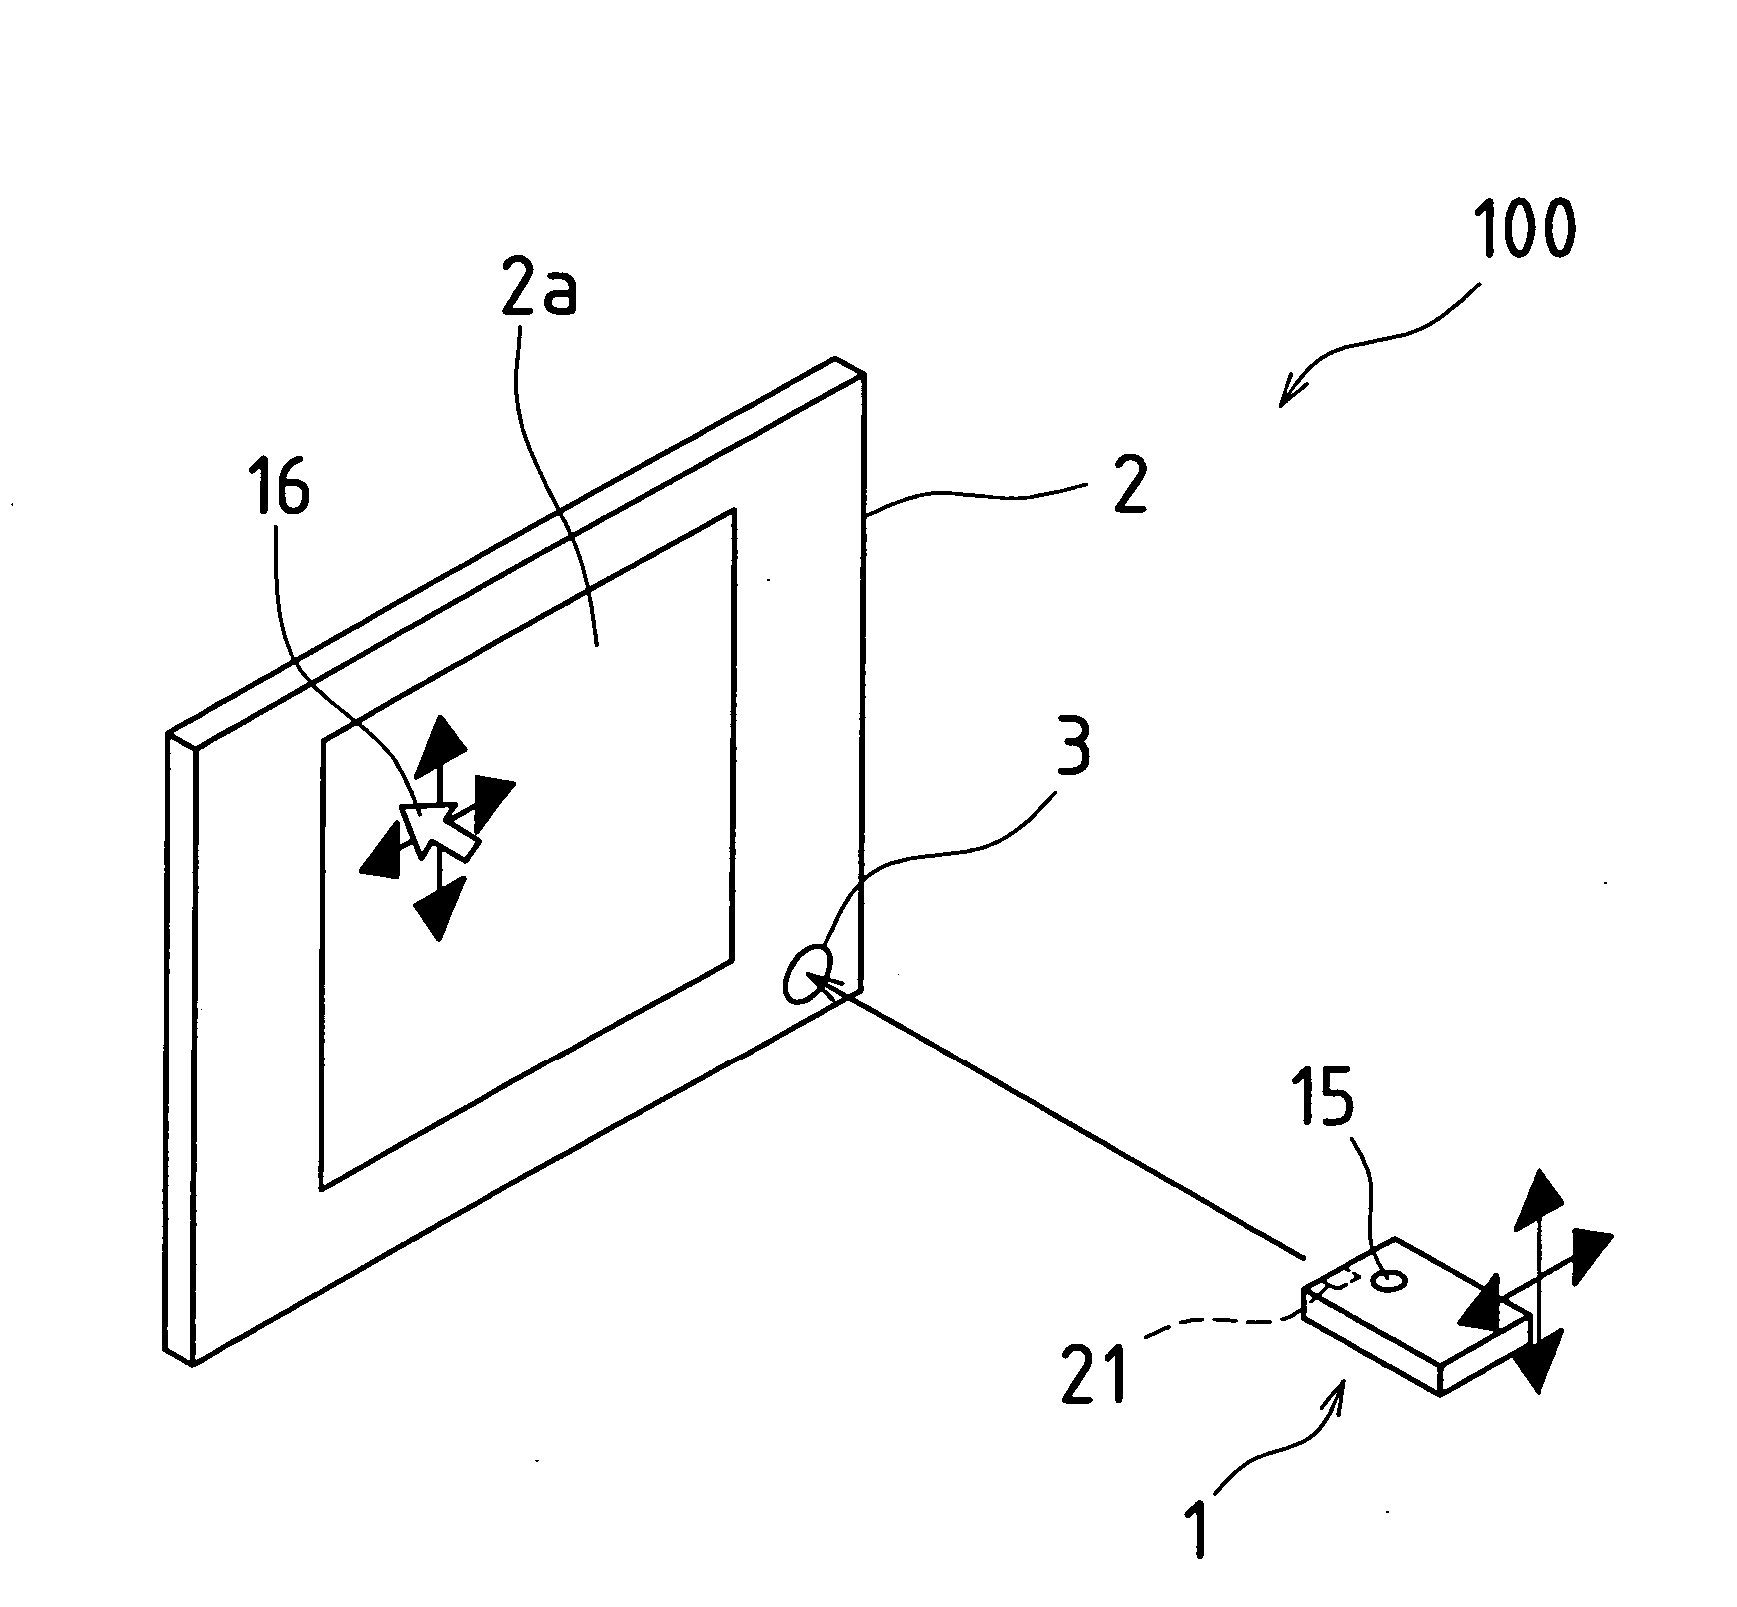 Remote control device, electronic device, display device, and game machine control device